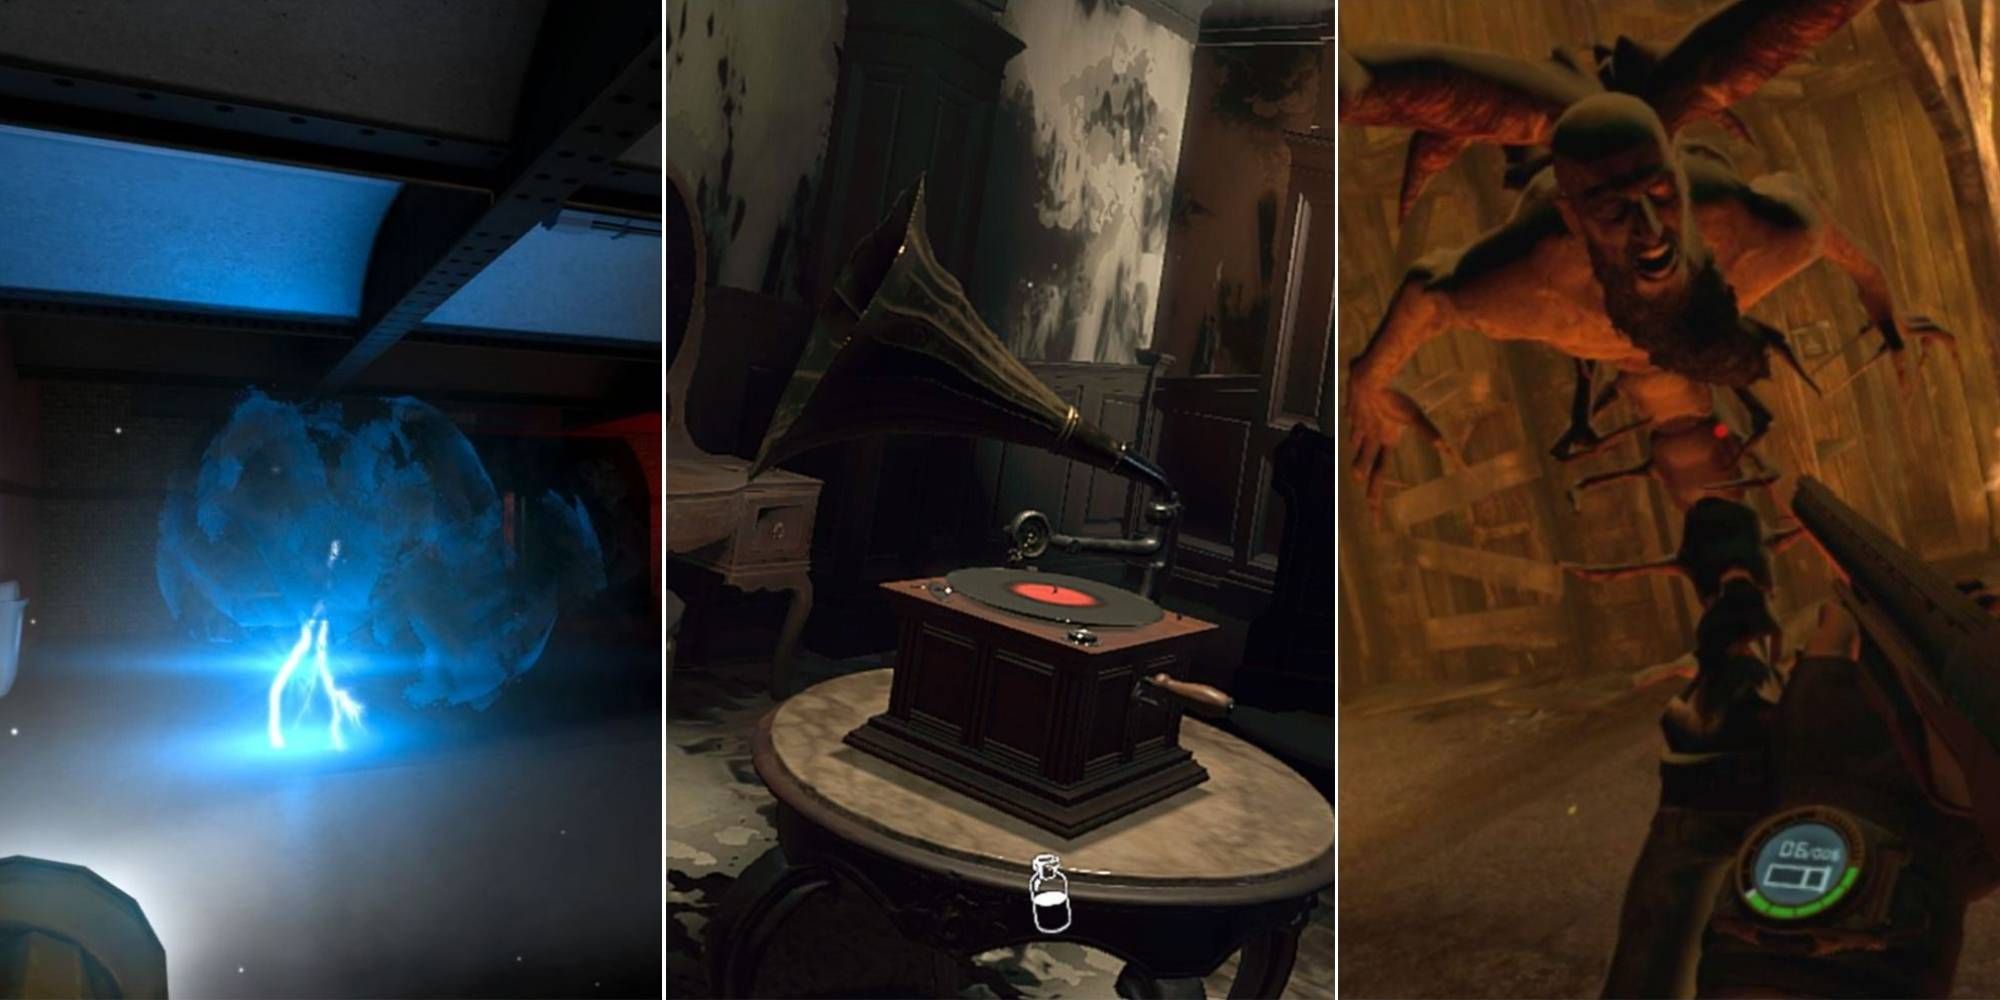 Scenes from three different Oculus Quest VR horror games: Project Terminus VR, Layers of Fear, and Resident Evil 4